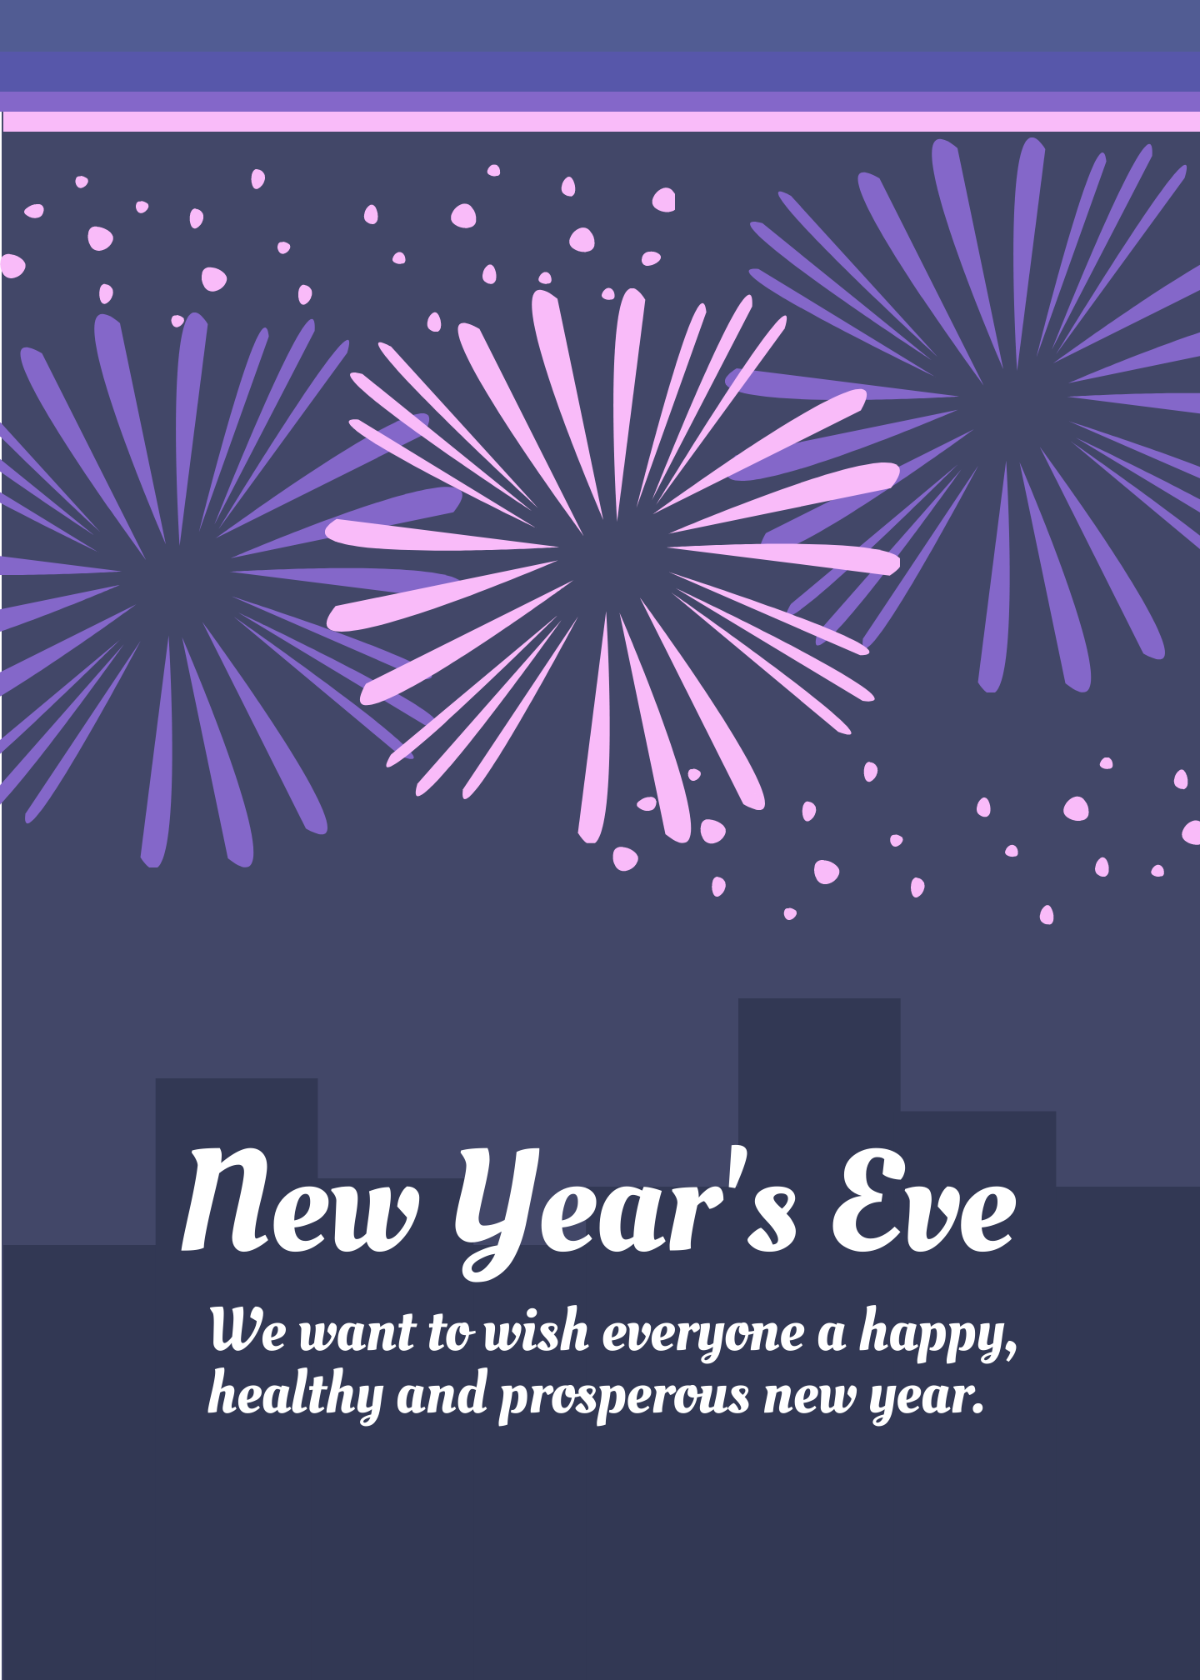 New Year's Eve Greeting Card Template